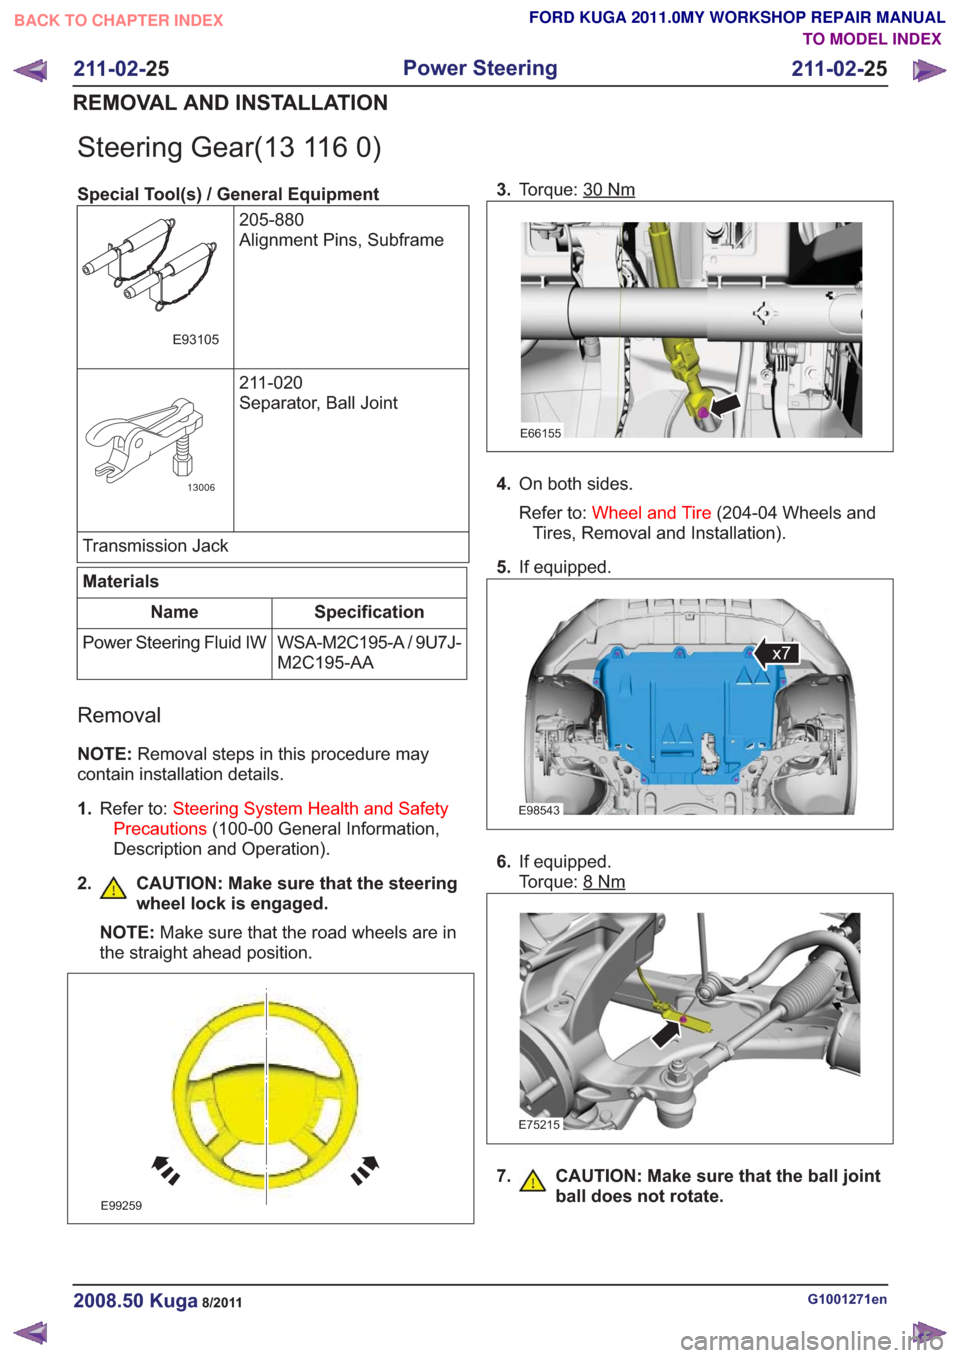 FORD KUGA 2011 1.G User Guide Steering Gear(13 116 0)
Special Tool(s) / General Equipment205-880
Alignment Pins, Subframe
E93105
211-020
Separator, Ball Joint
13006
Transmission Jack
Materials
Specification
Name
WSA-M2C195-A / 9U7